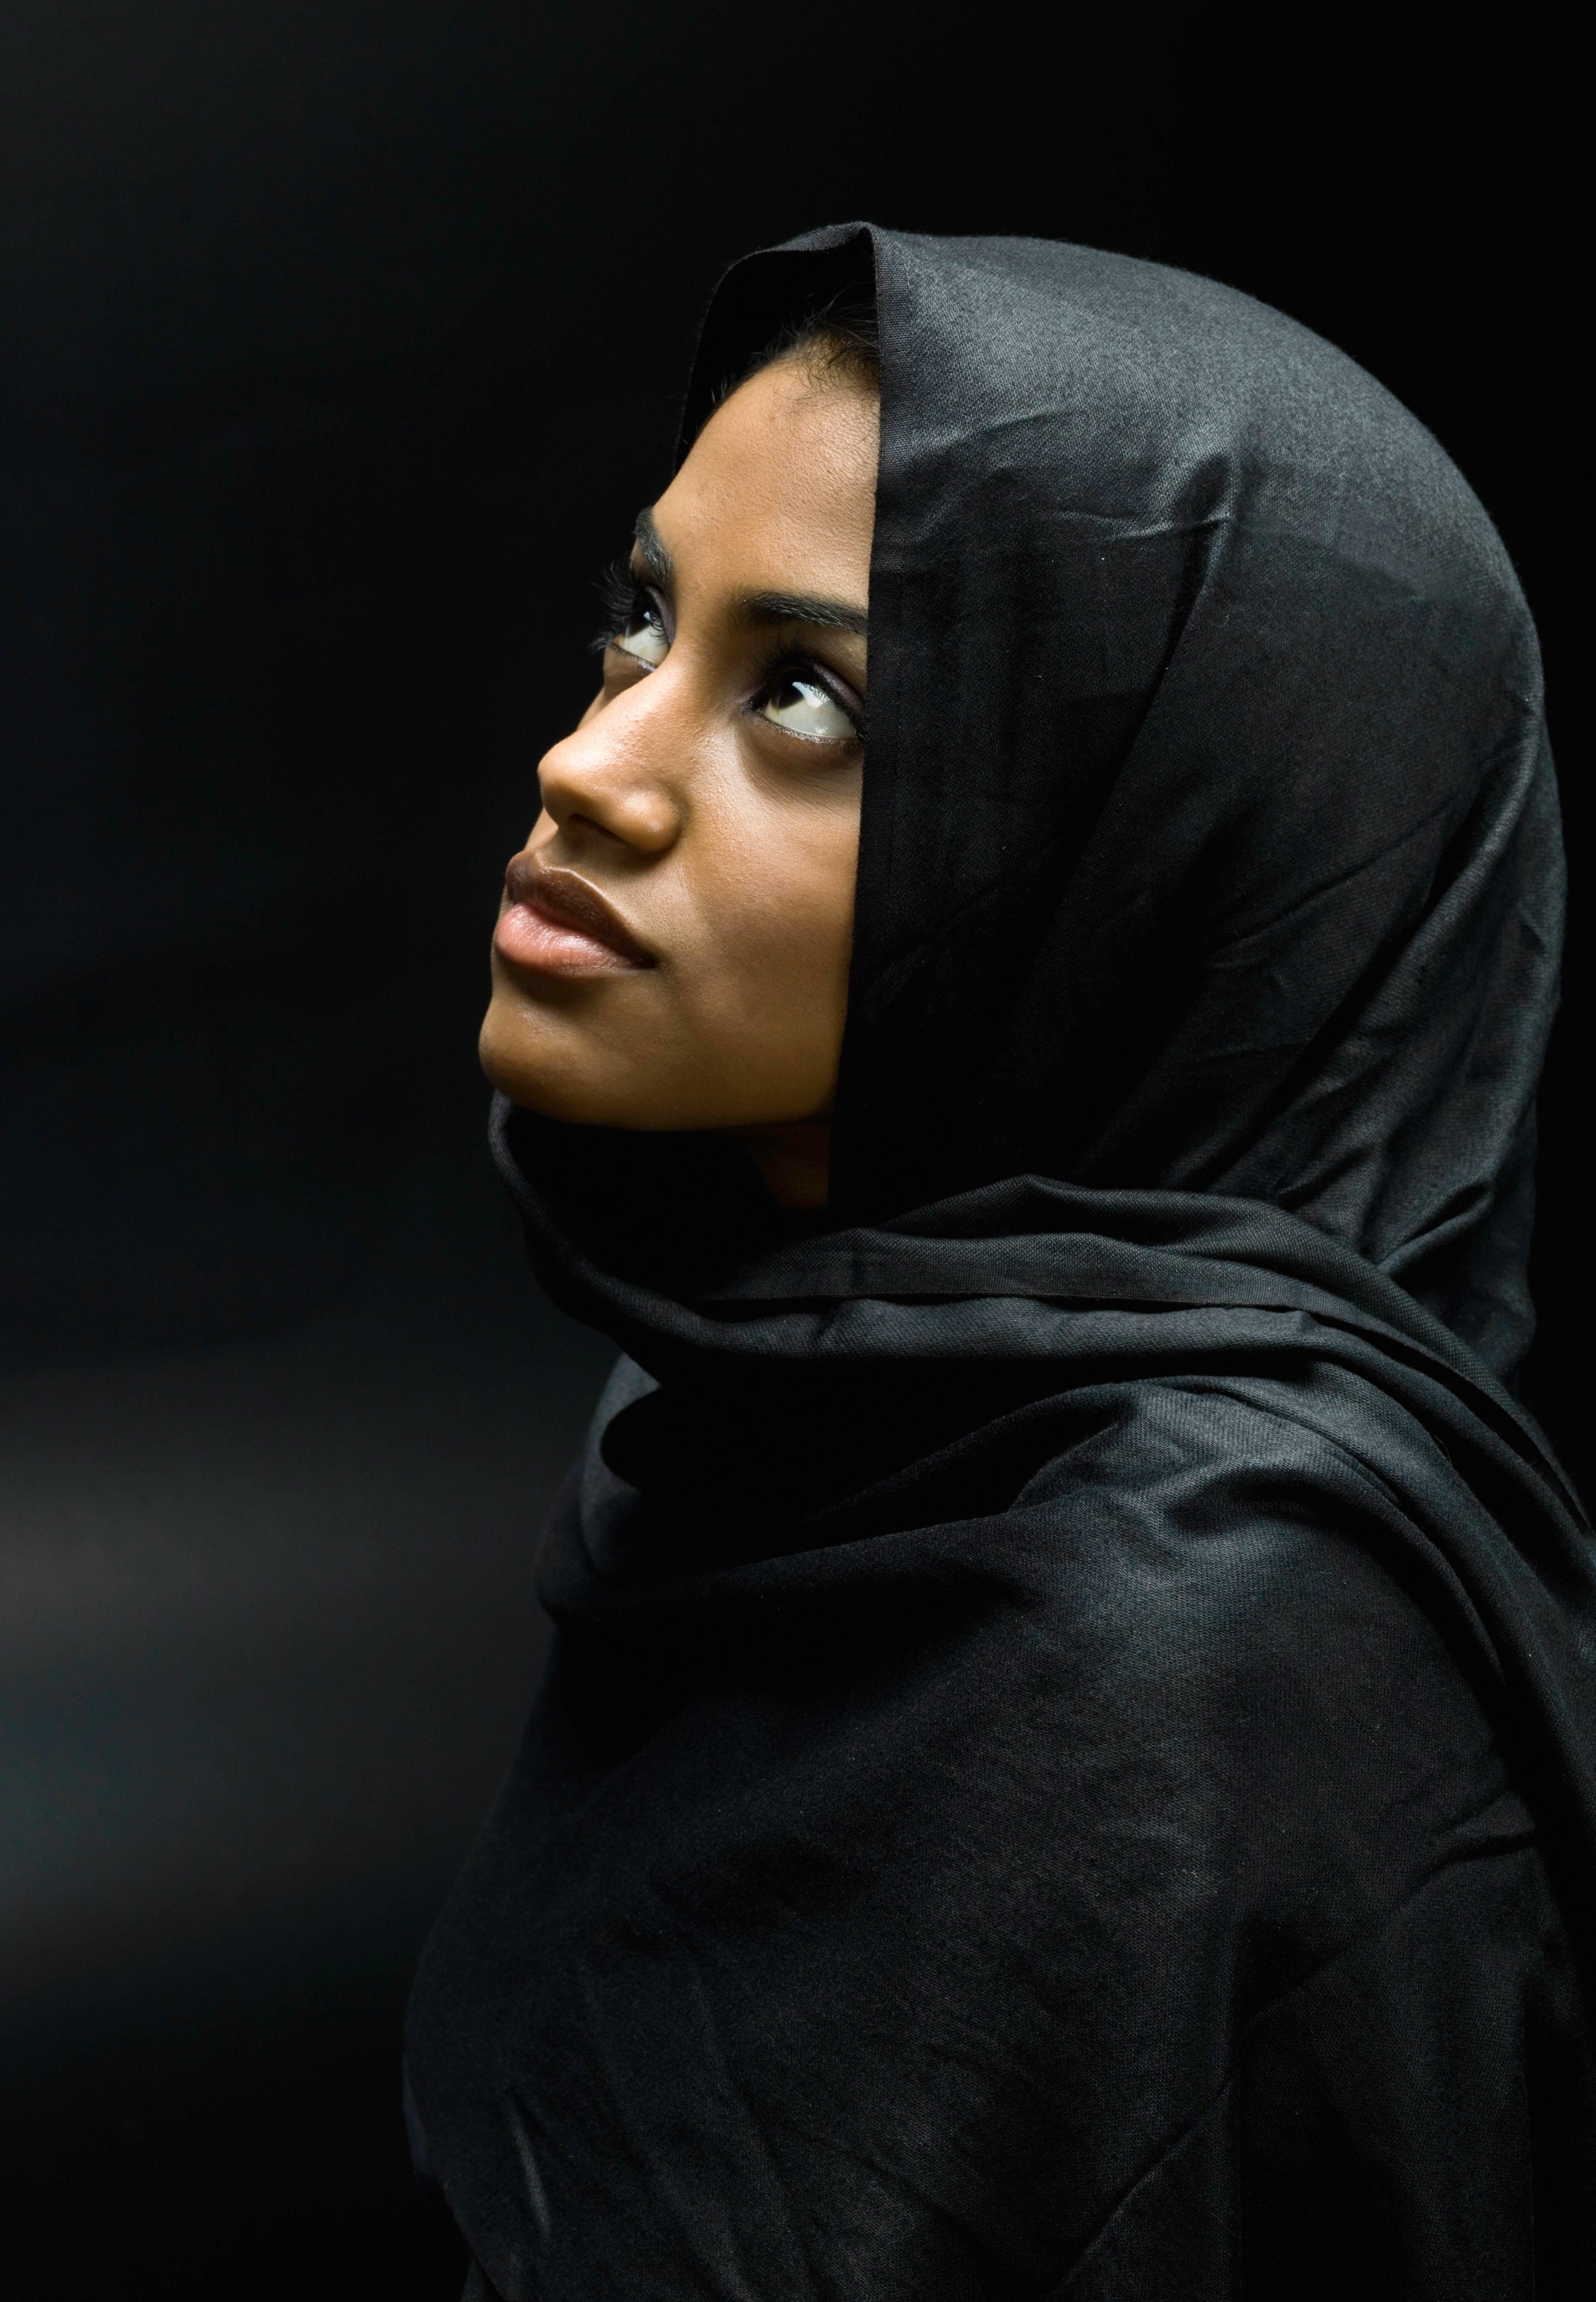 How To Deal With Pop Culture Beauty Standards When You're A Black Muslim Girl
